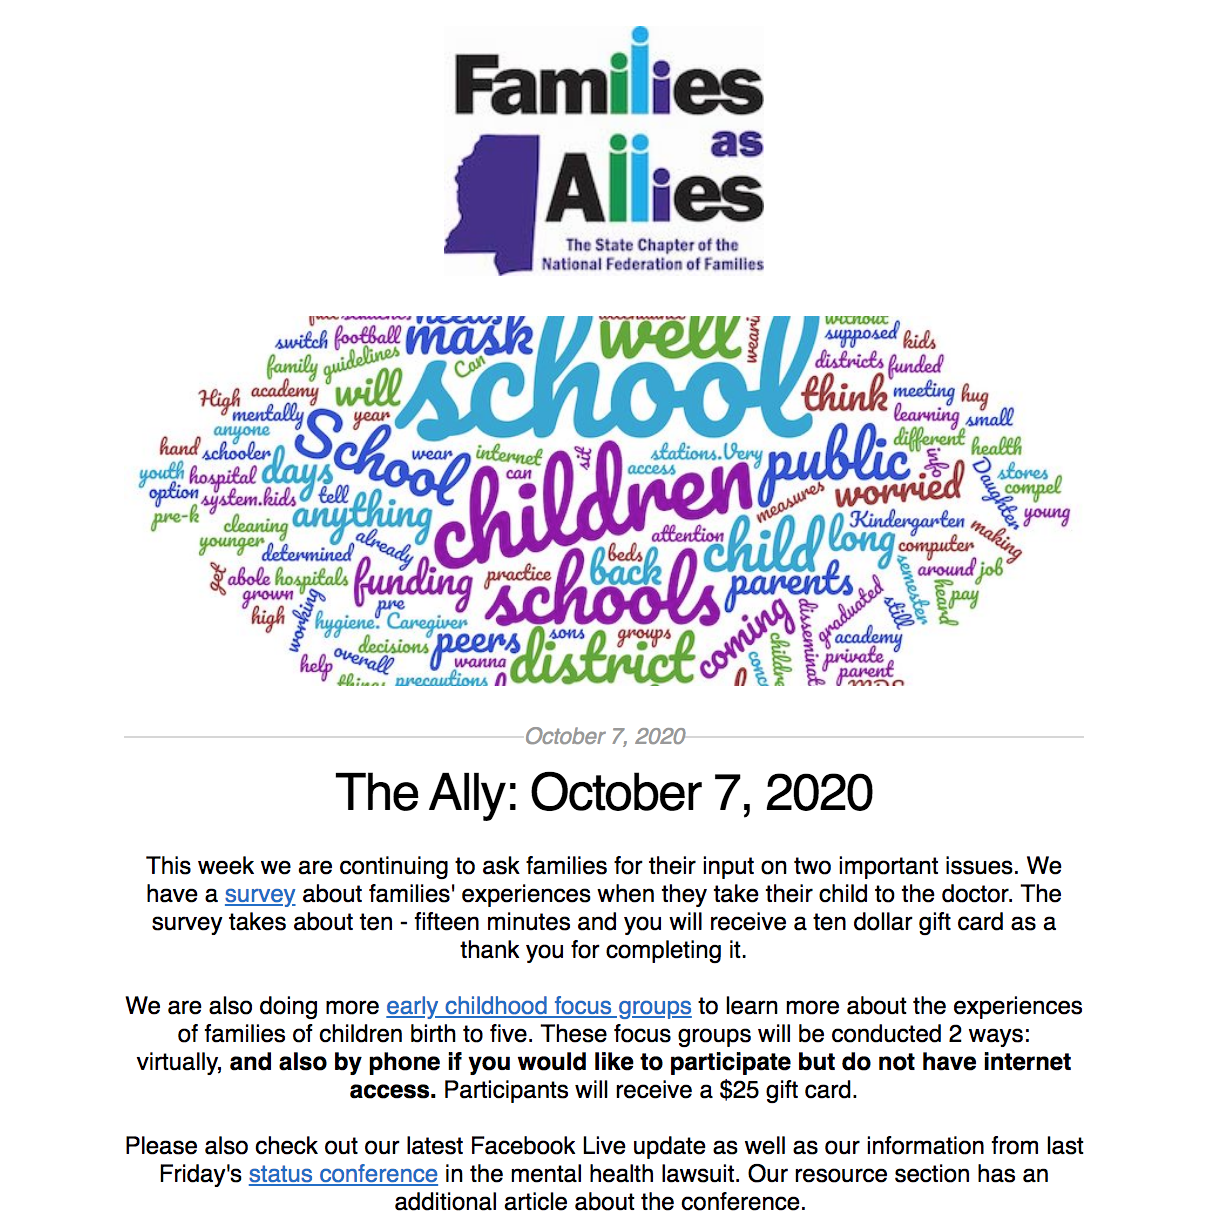 The Ally: October 7, 2020